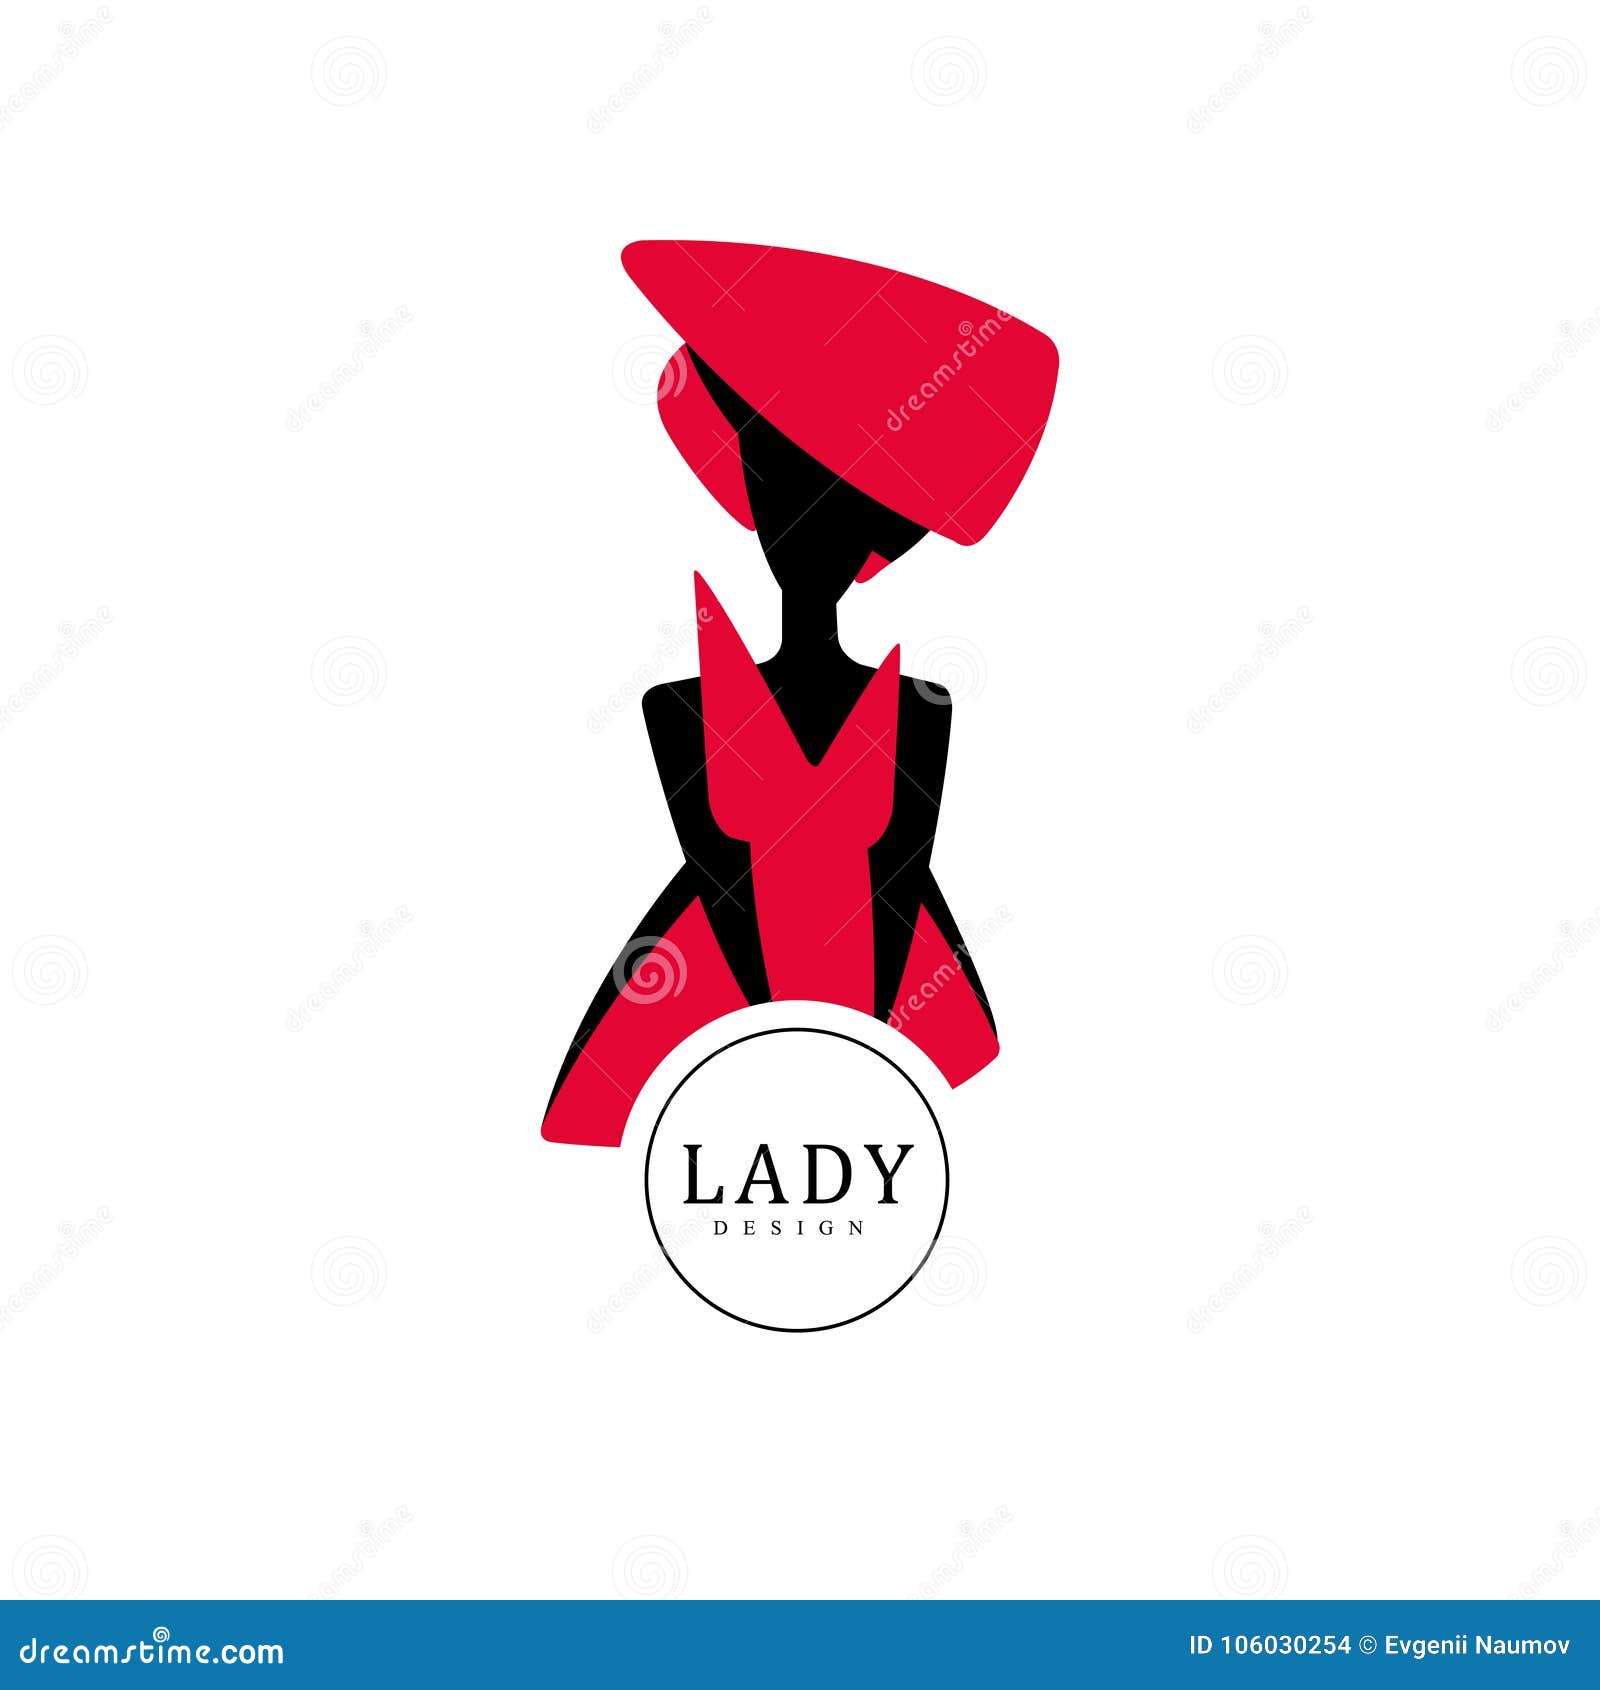 Lady Design Red And Black Fashion And Beauty Logo Design Silhouette Of Young Lady In A Hat Vector Illustration Stock Vector Illustration Of Logo Lady